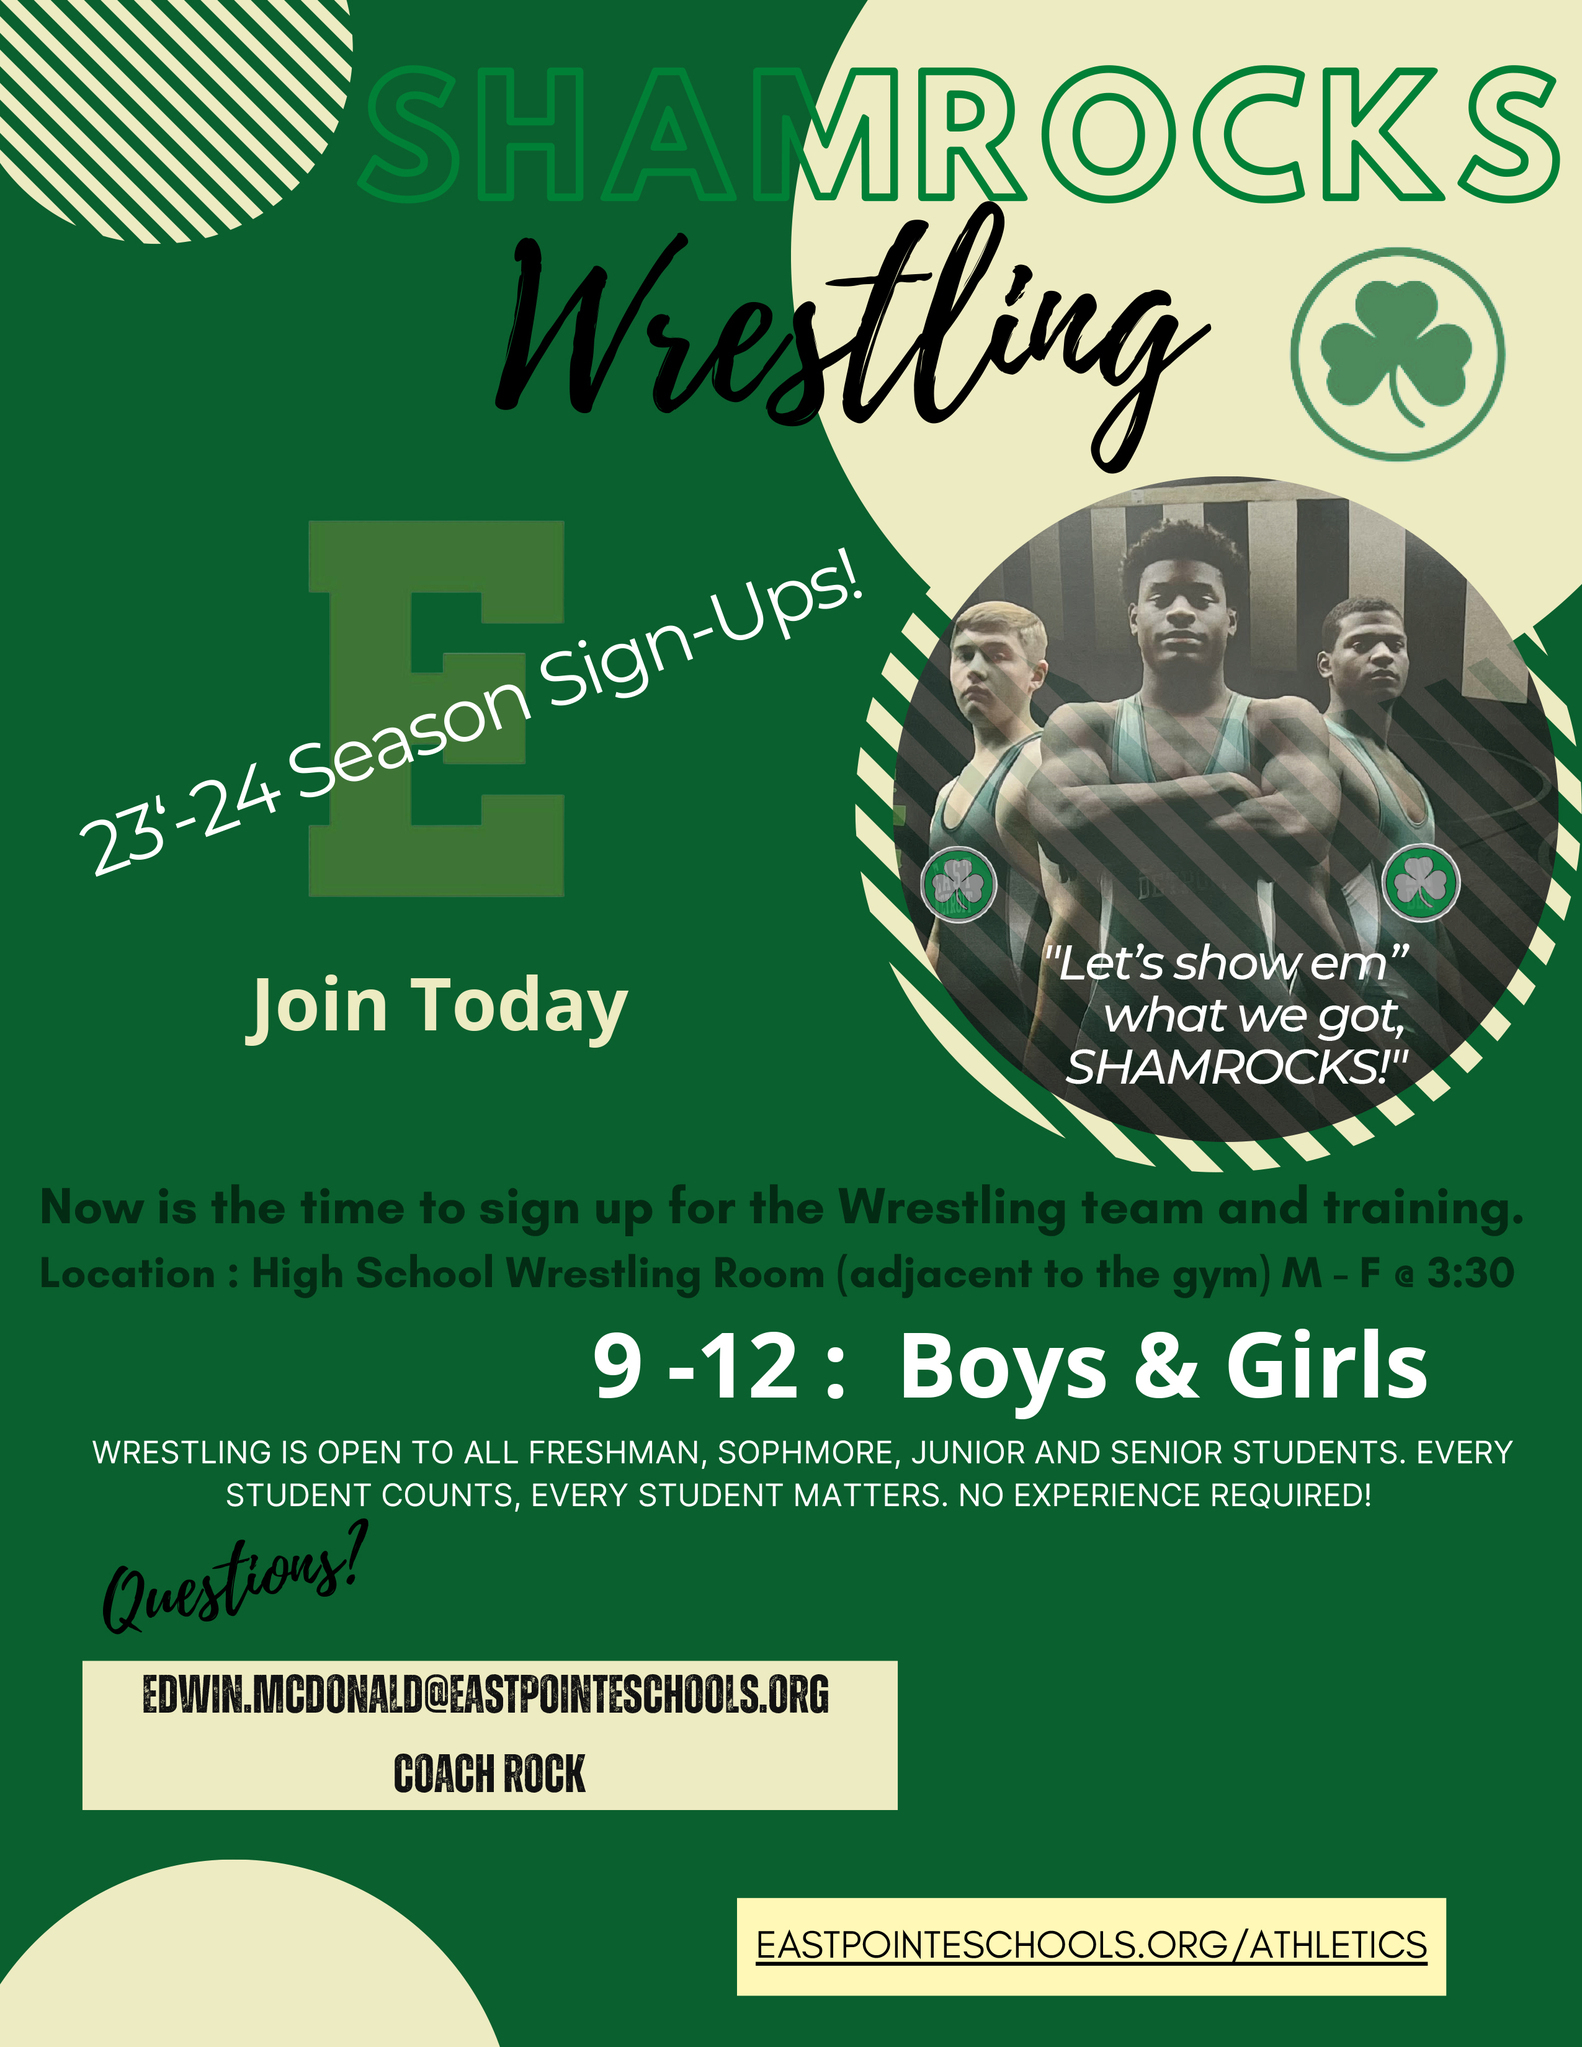 Wrestling sign-ups flier - grades 9-12 boys and girls welcome; Location - high school wrestling room Monday-Friday at 3:30pm